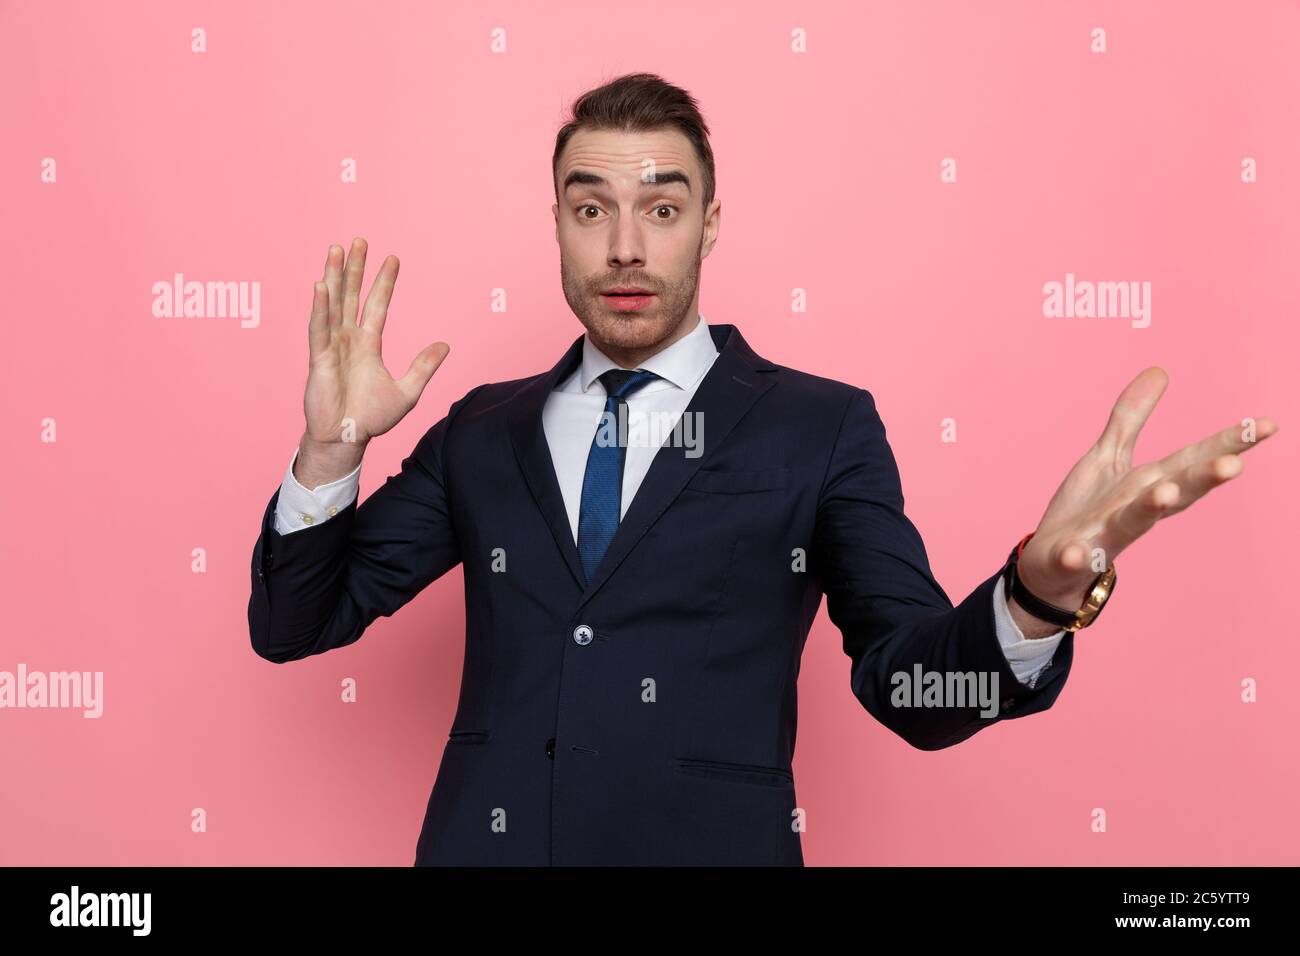 confused young businessman holding hands up and gesticulating, standing on pink background Stock Photo